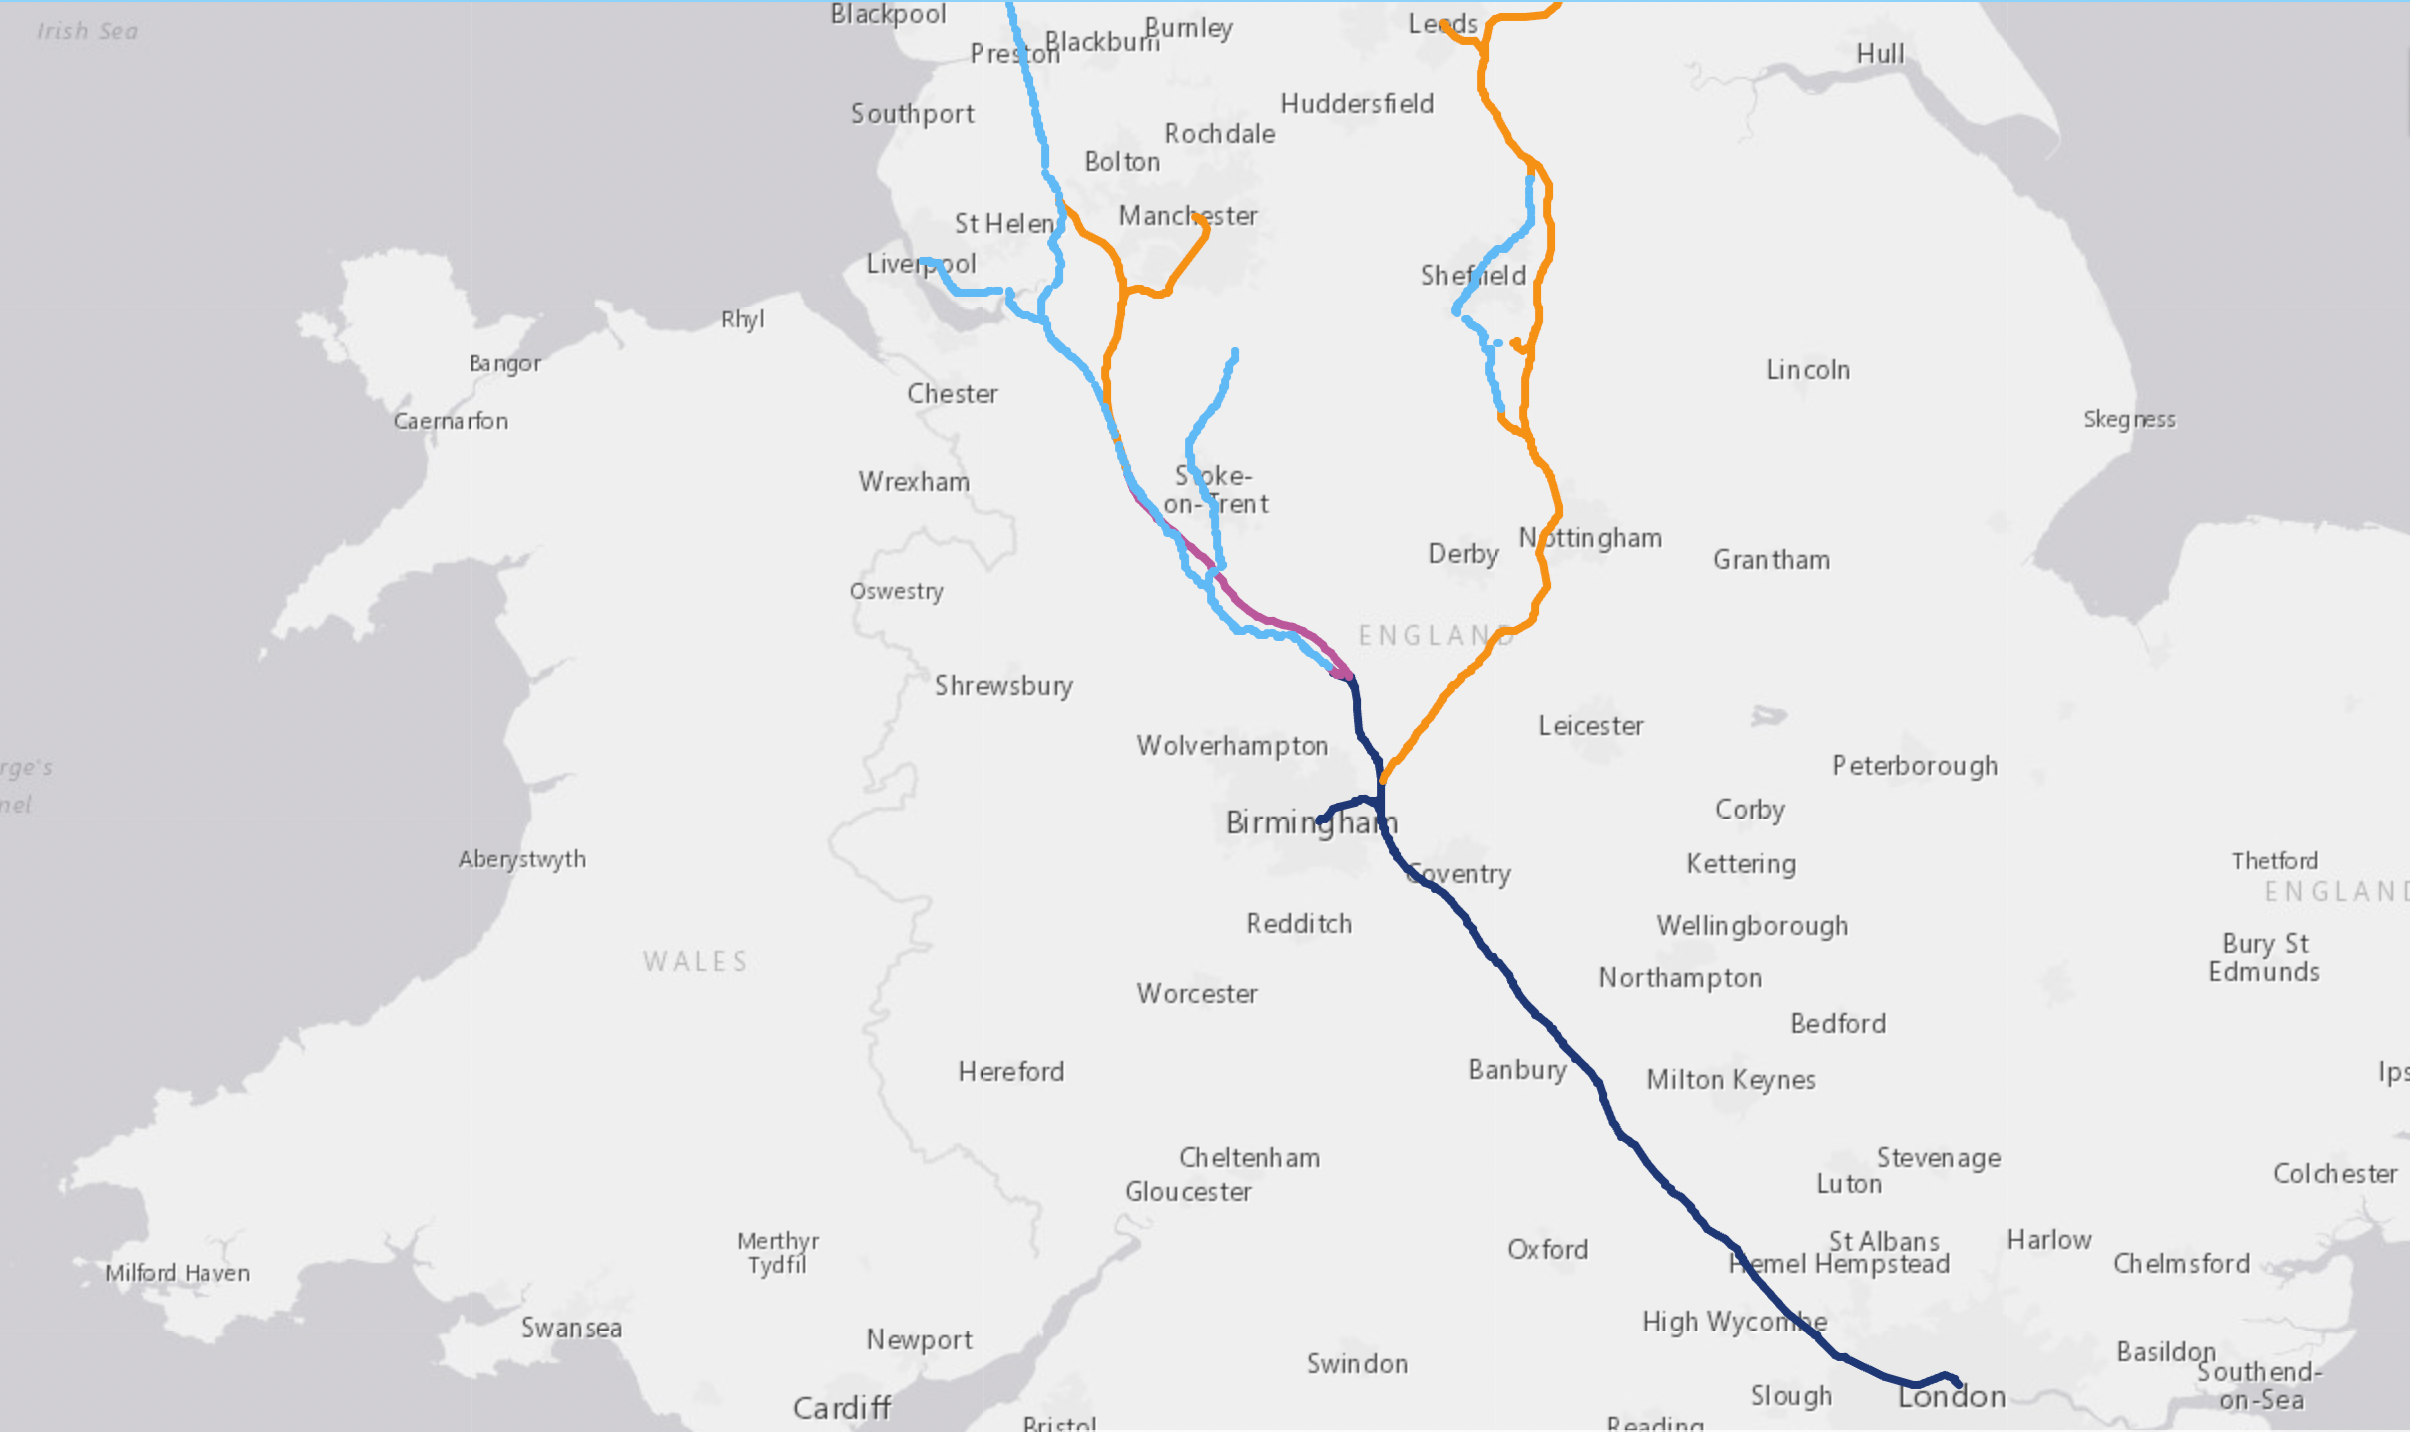 All stations? Official HS2 map showing the original planned extension from Birmingham to Leeds via Nottingham and Sheffield